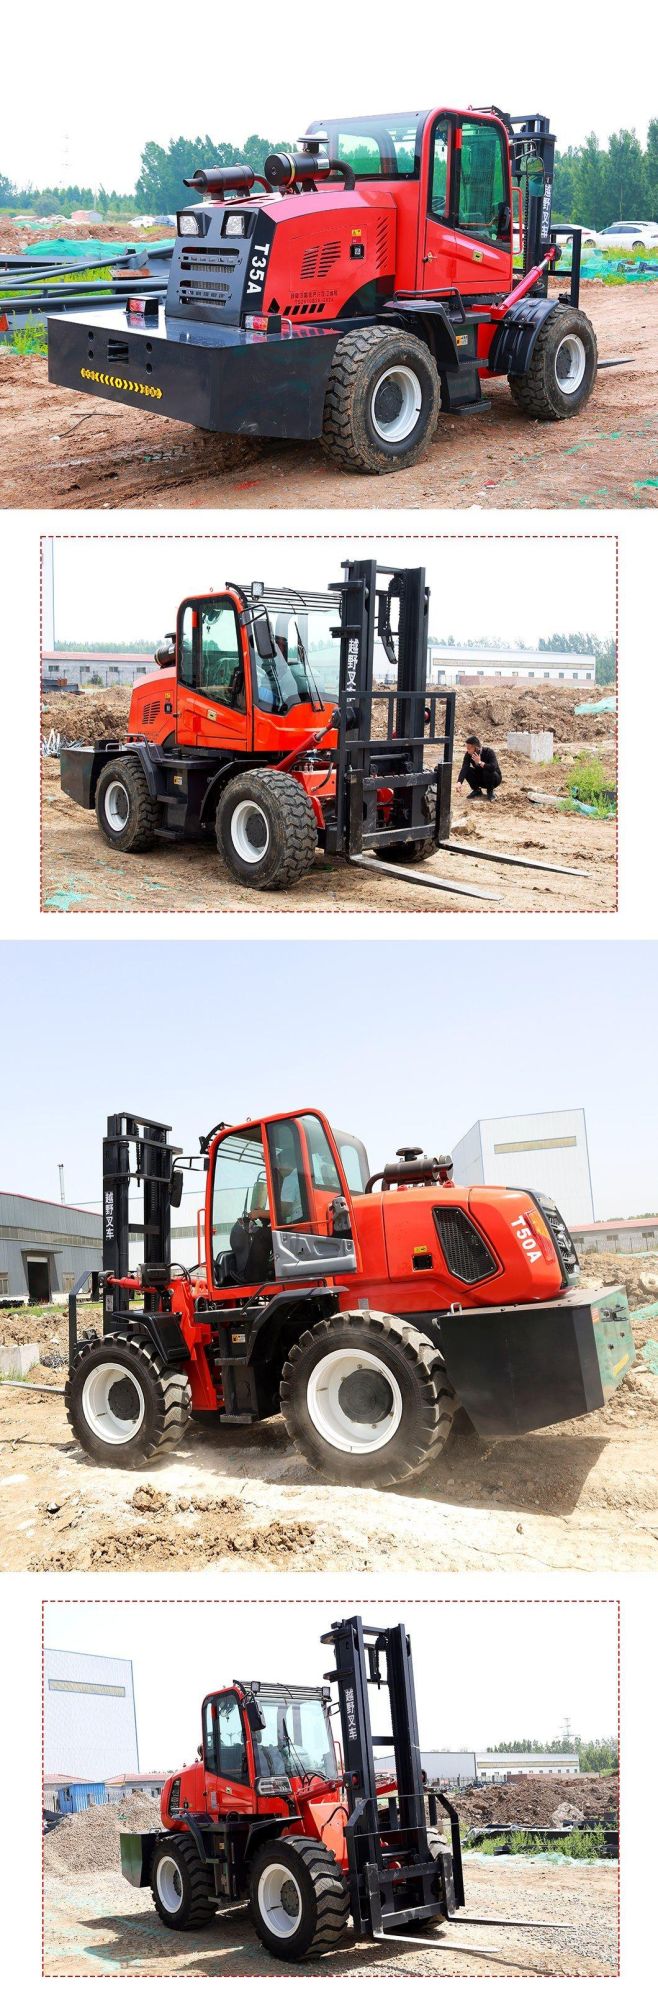 off Road Forklift Sizes Counterbalance Warehouse Small Electric Forklift Accessories